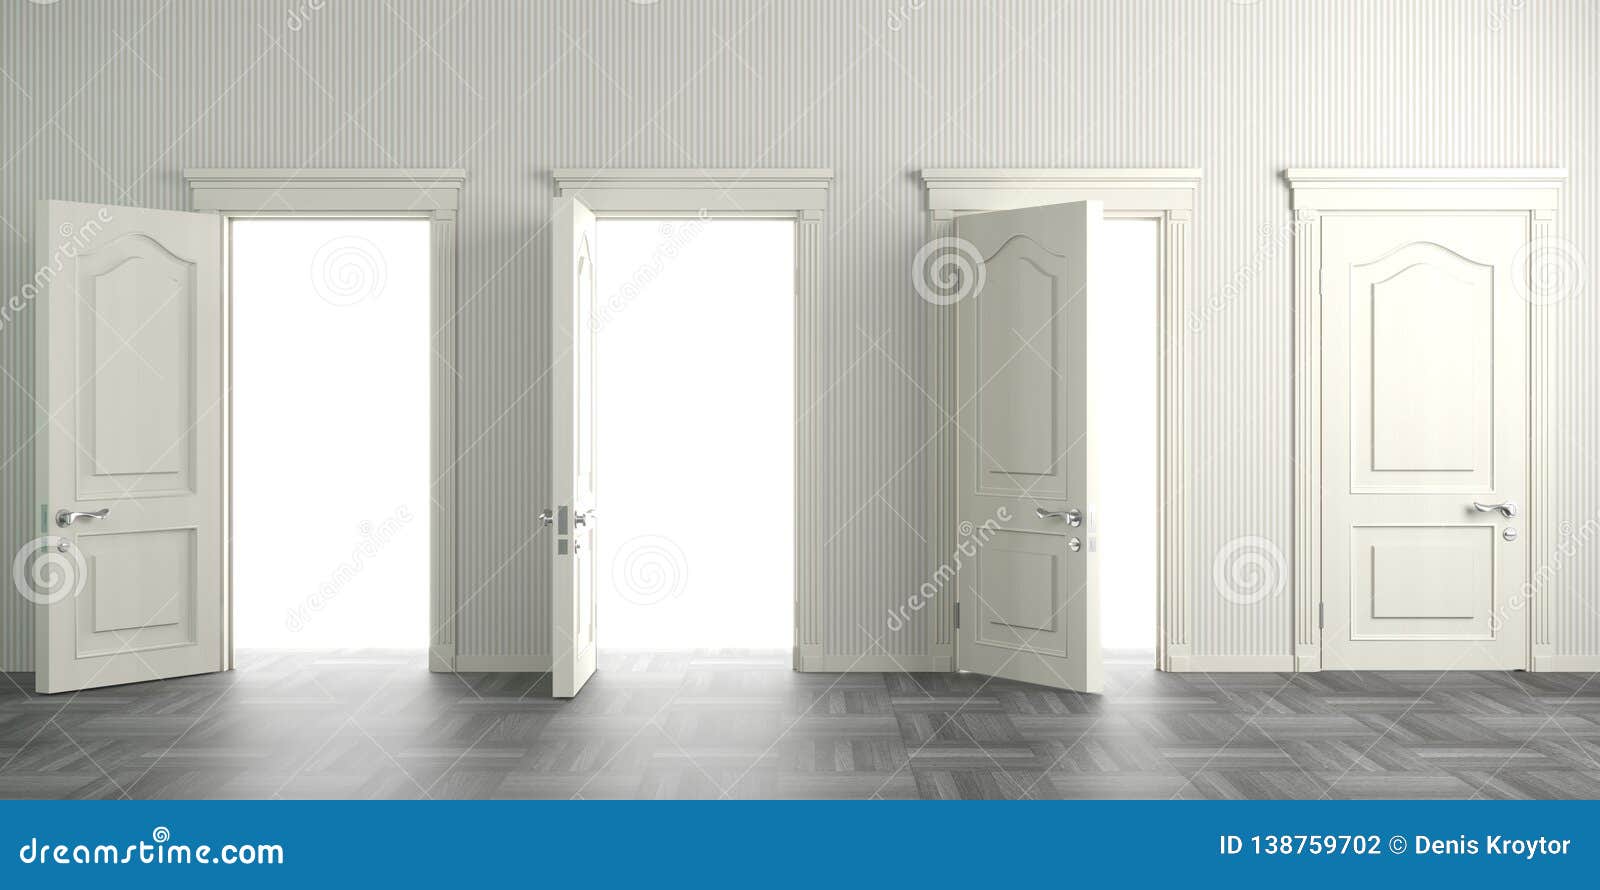 Four White Open Doors On The Wall Stock Photo Image Of Hospital